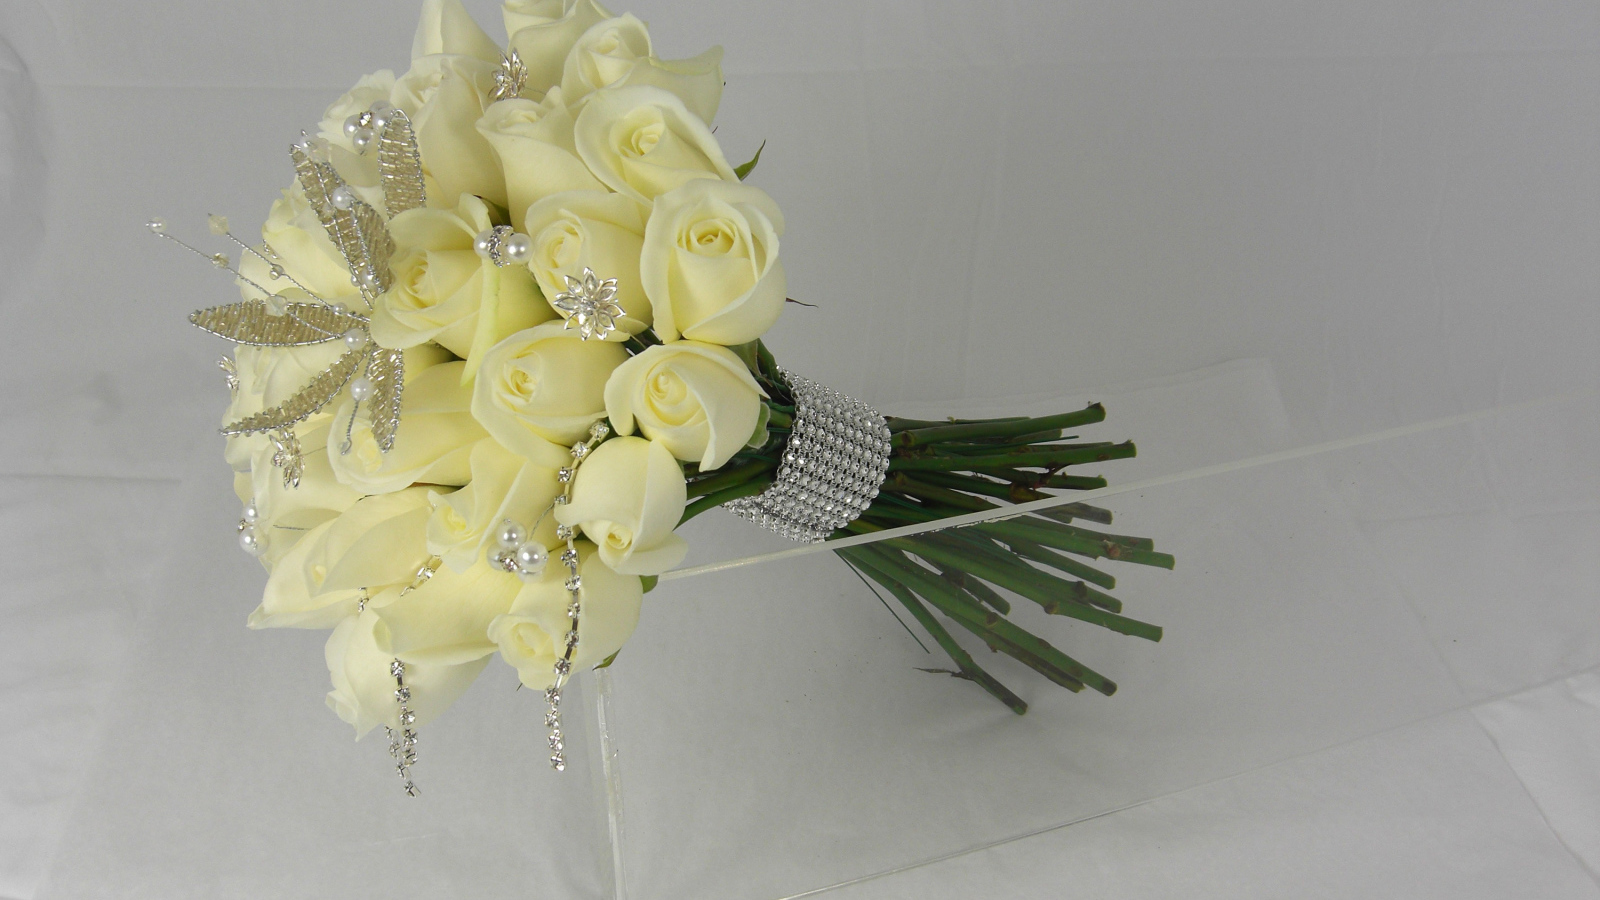 A bouquet of delicate white roses with ornaments on a gray background